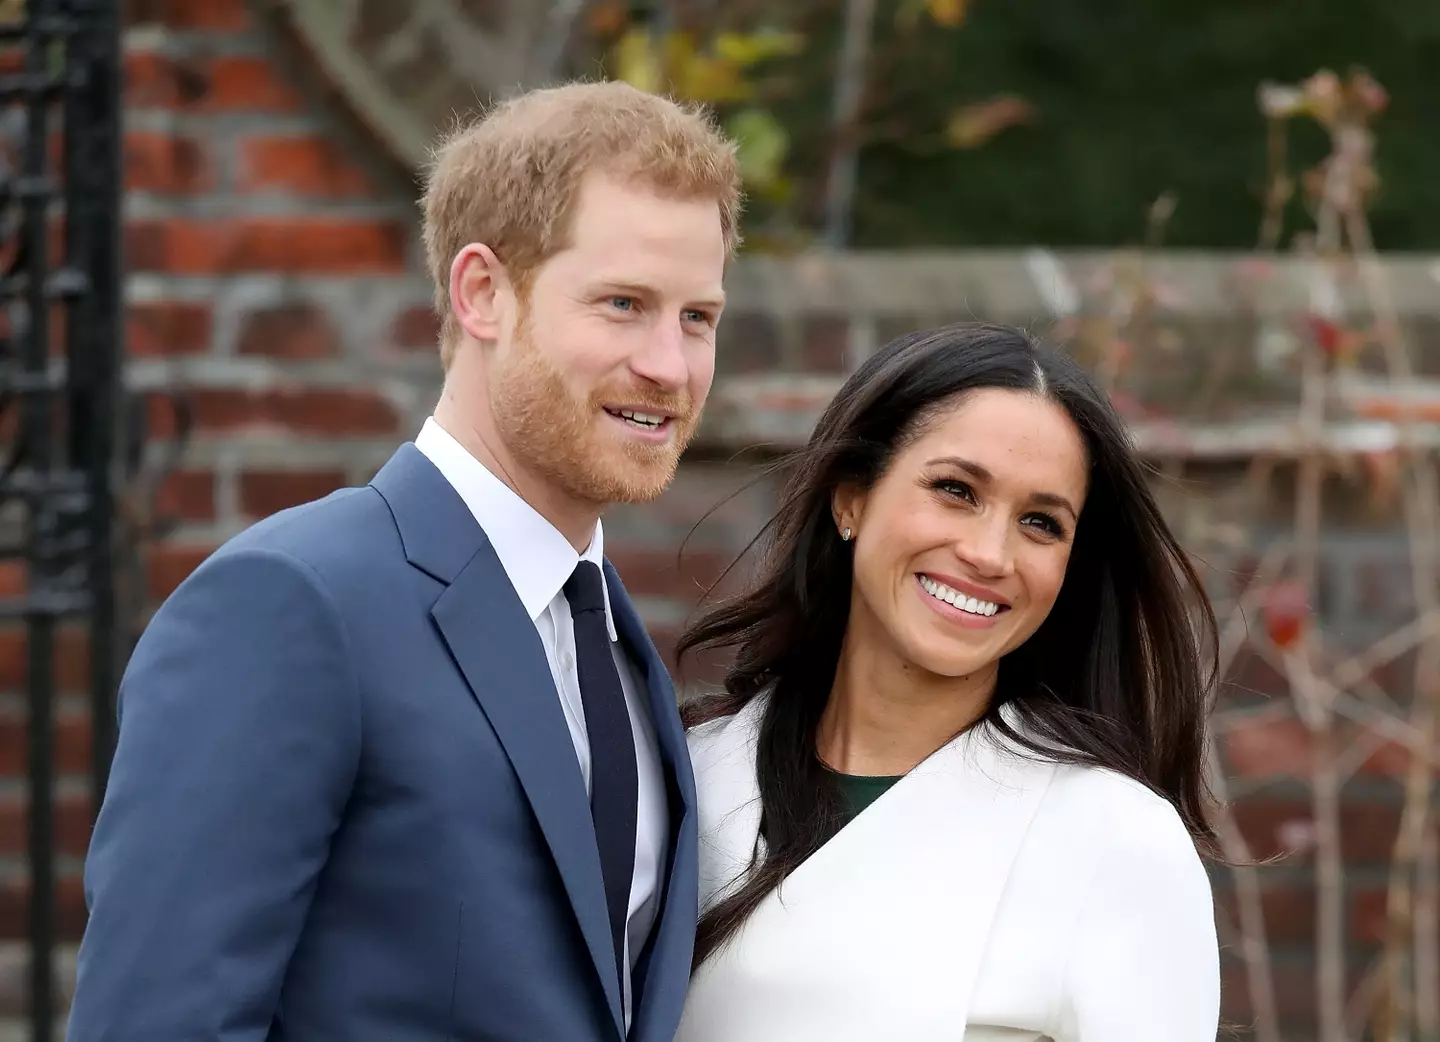 The Duchess of Sussex left her role shortly before getting hitched to Prince Harry. (Chris Jackson/Chris Jackson/Getty Images)